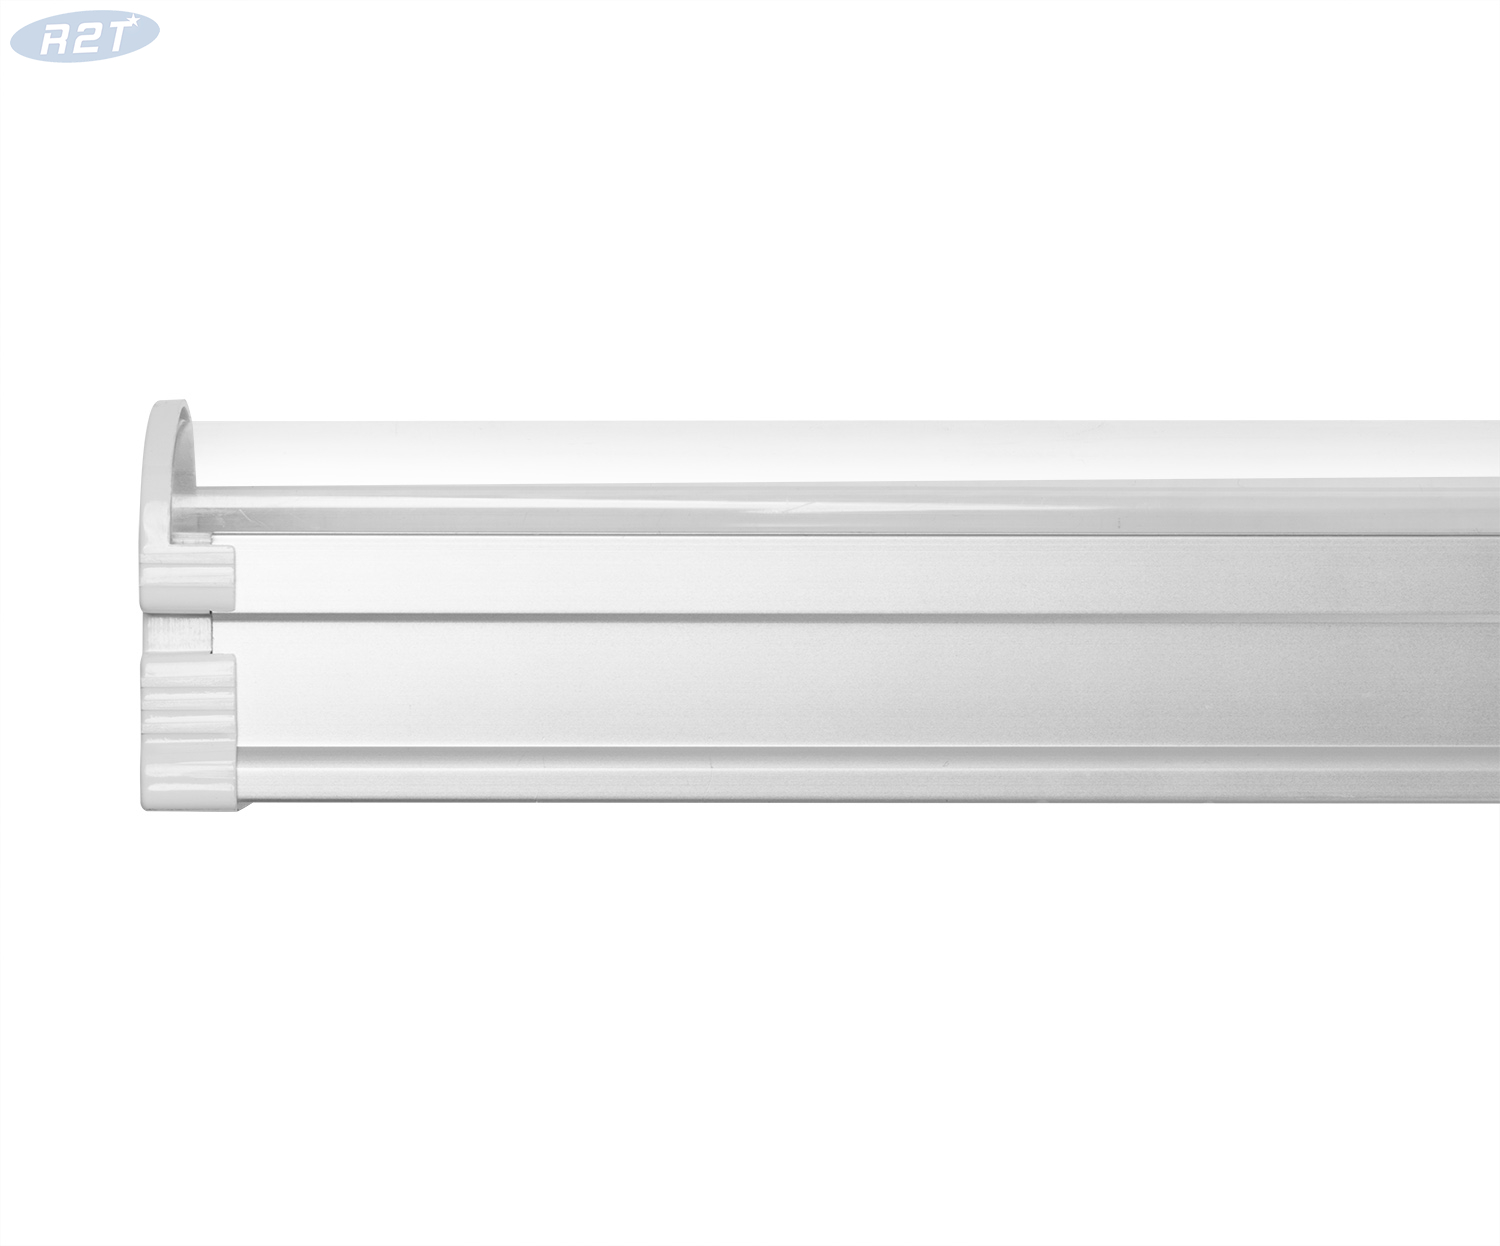 R2TCrecer OEM ODM impermeable 4FT 80W espectro horticultura LED lineal granja luces de cultivo 15W 30W 60W